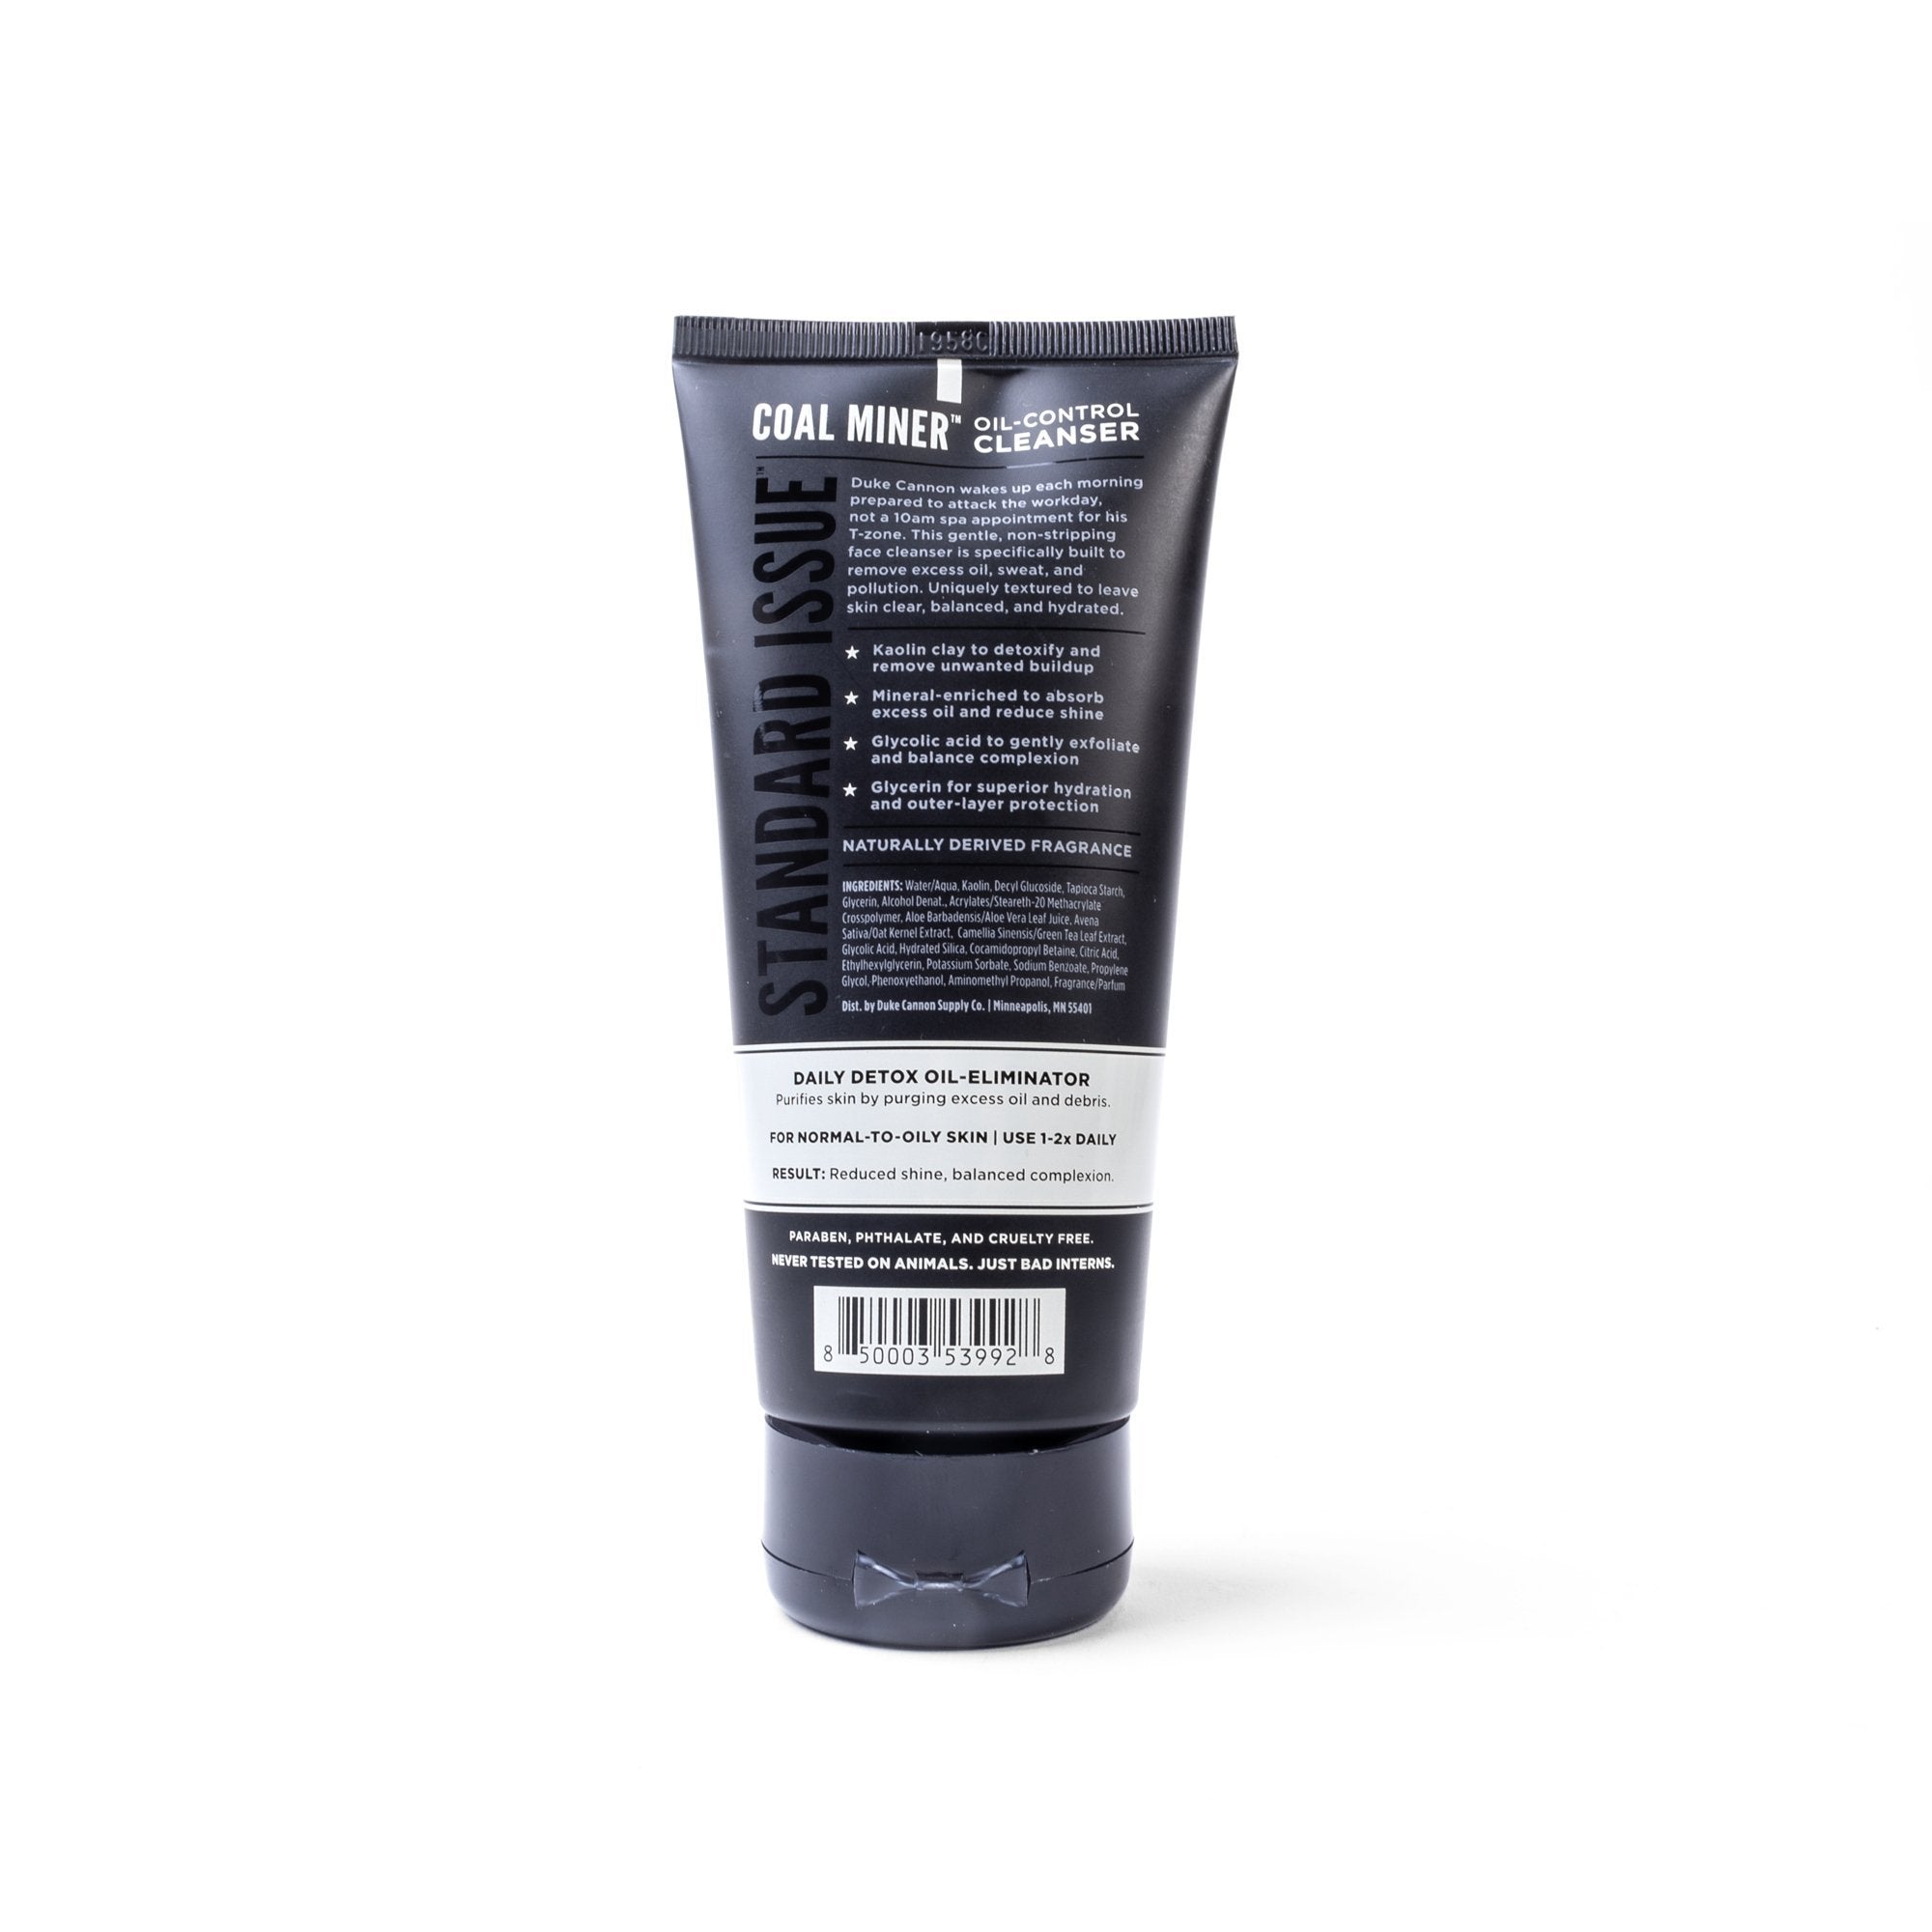 Duke Cannon - Standard Issue Coal Miner Oil Control Face Cleanser - City Workshop Men's Supply Co.